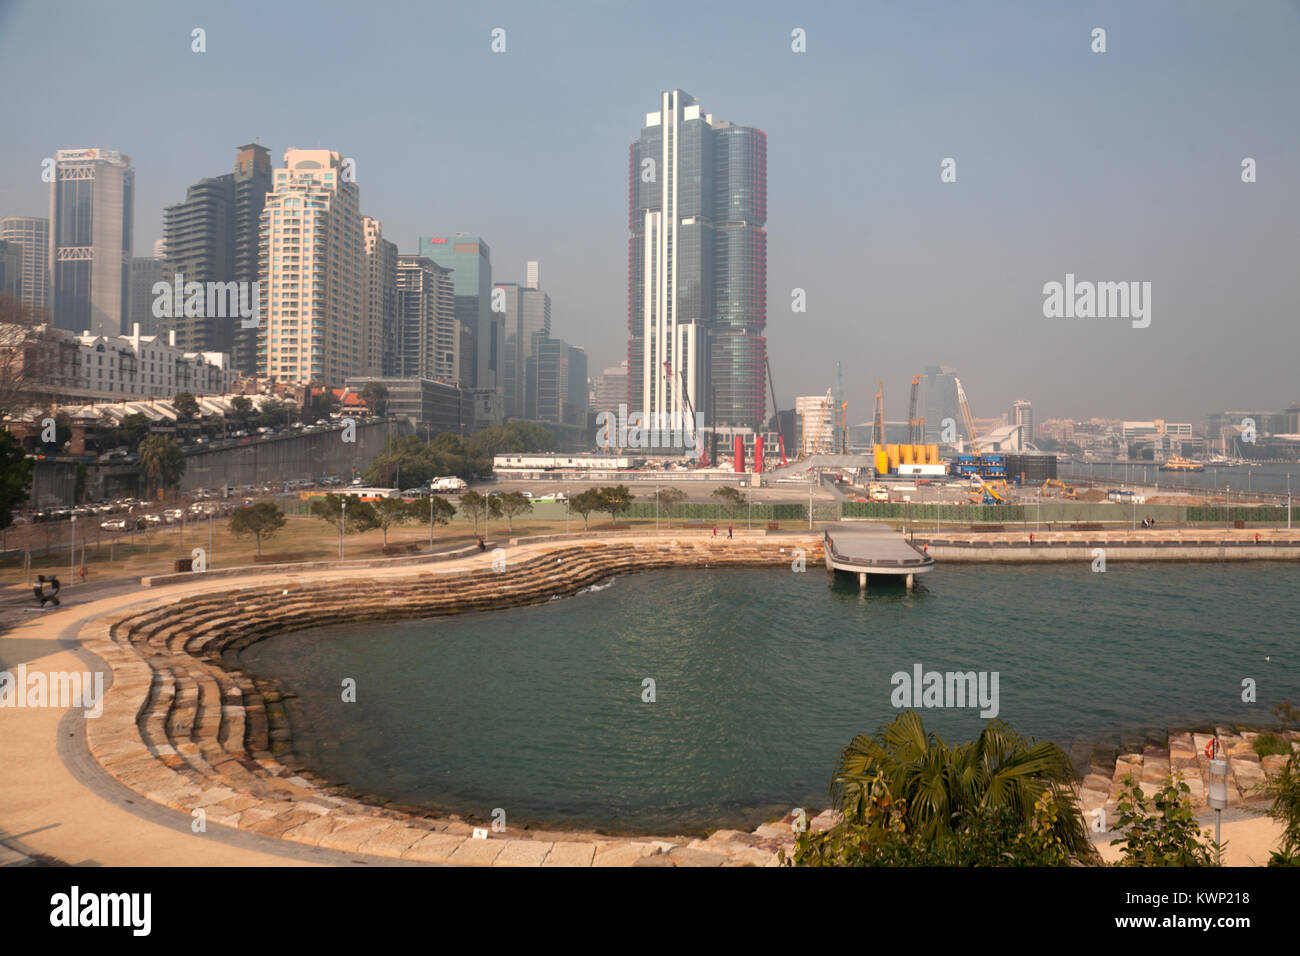 Reserl cove barangaroo finden Darling Harbour Sydney New South Wales Australien Stockfoto